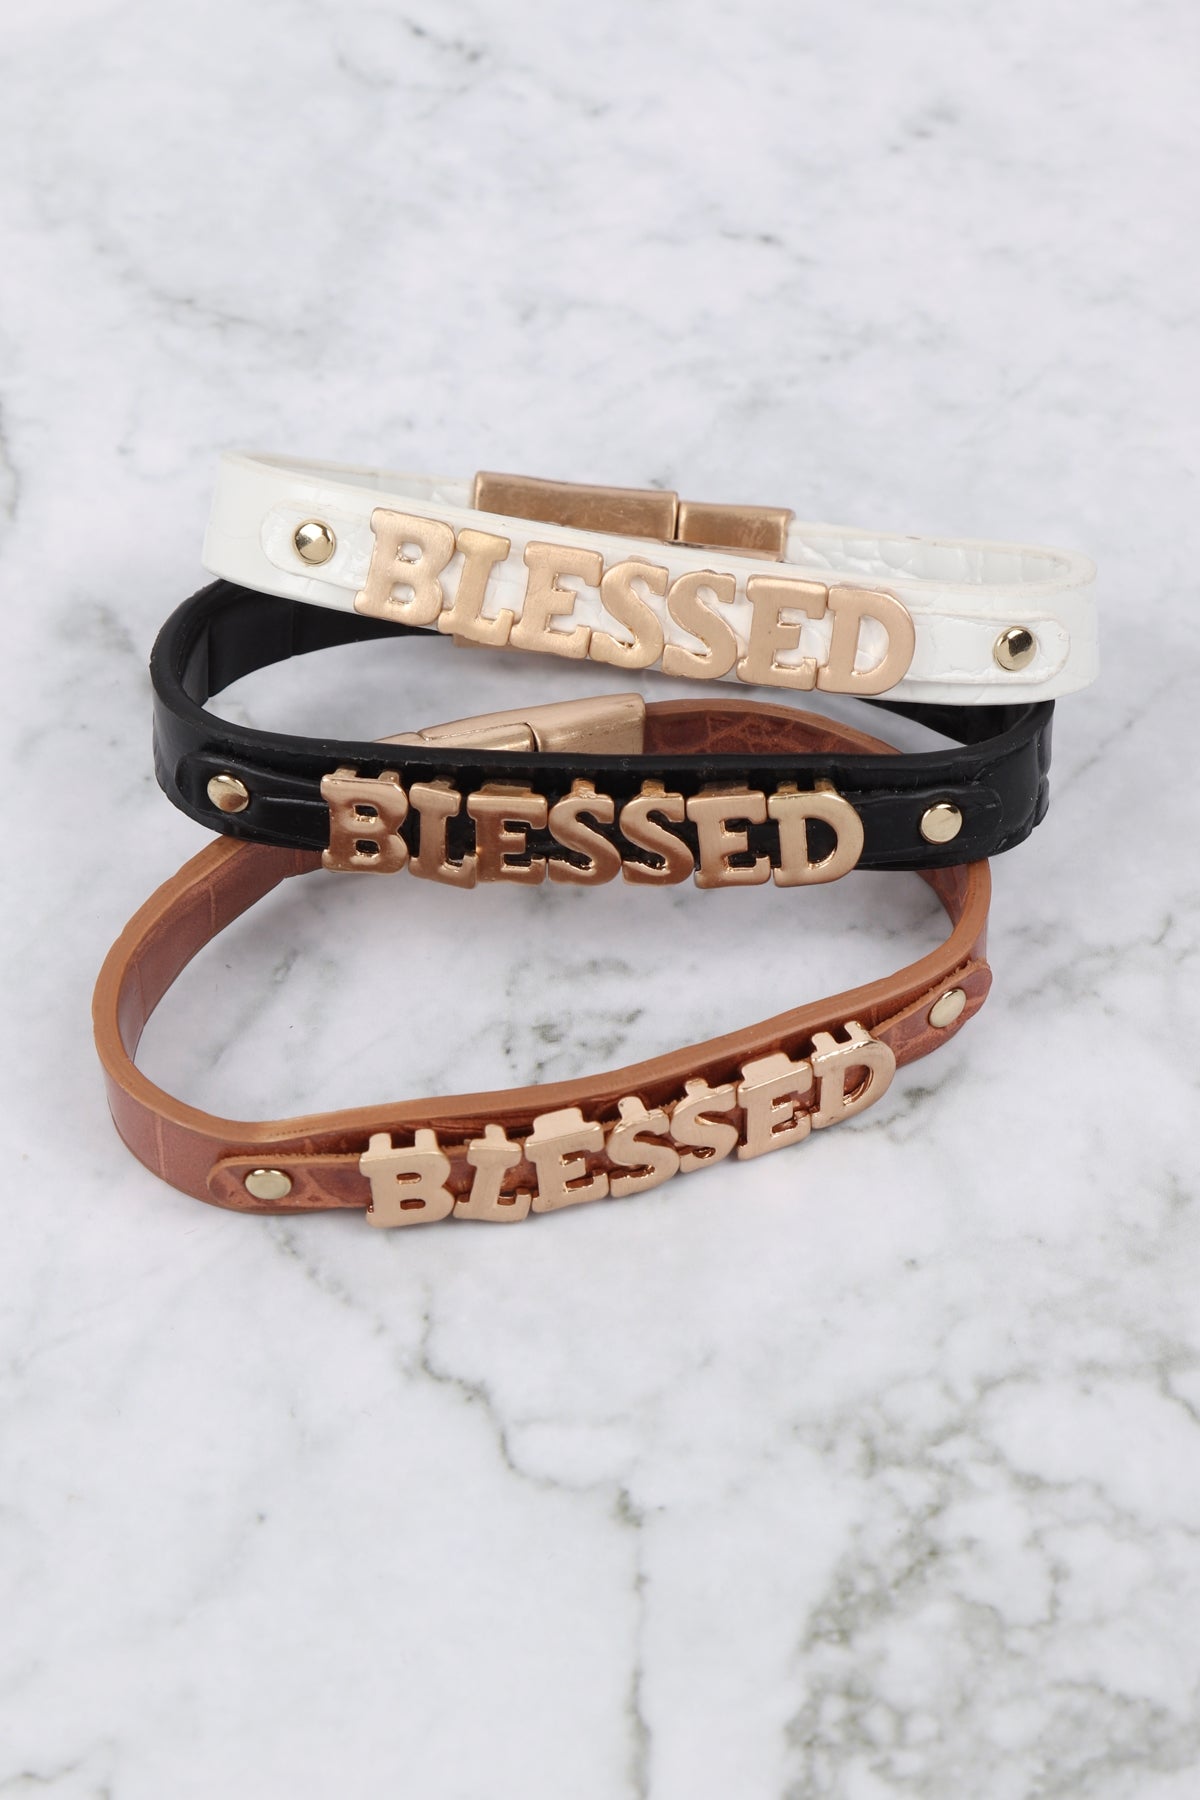 "BLESSED" LEATHER PERSONALIZED MAGNETIC BRACELET